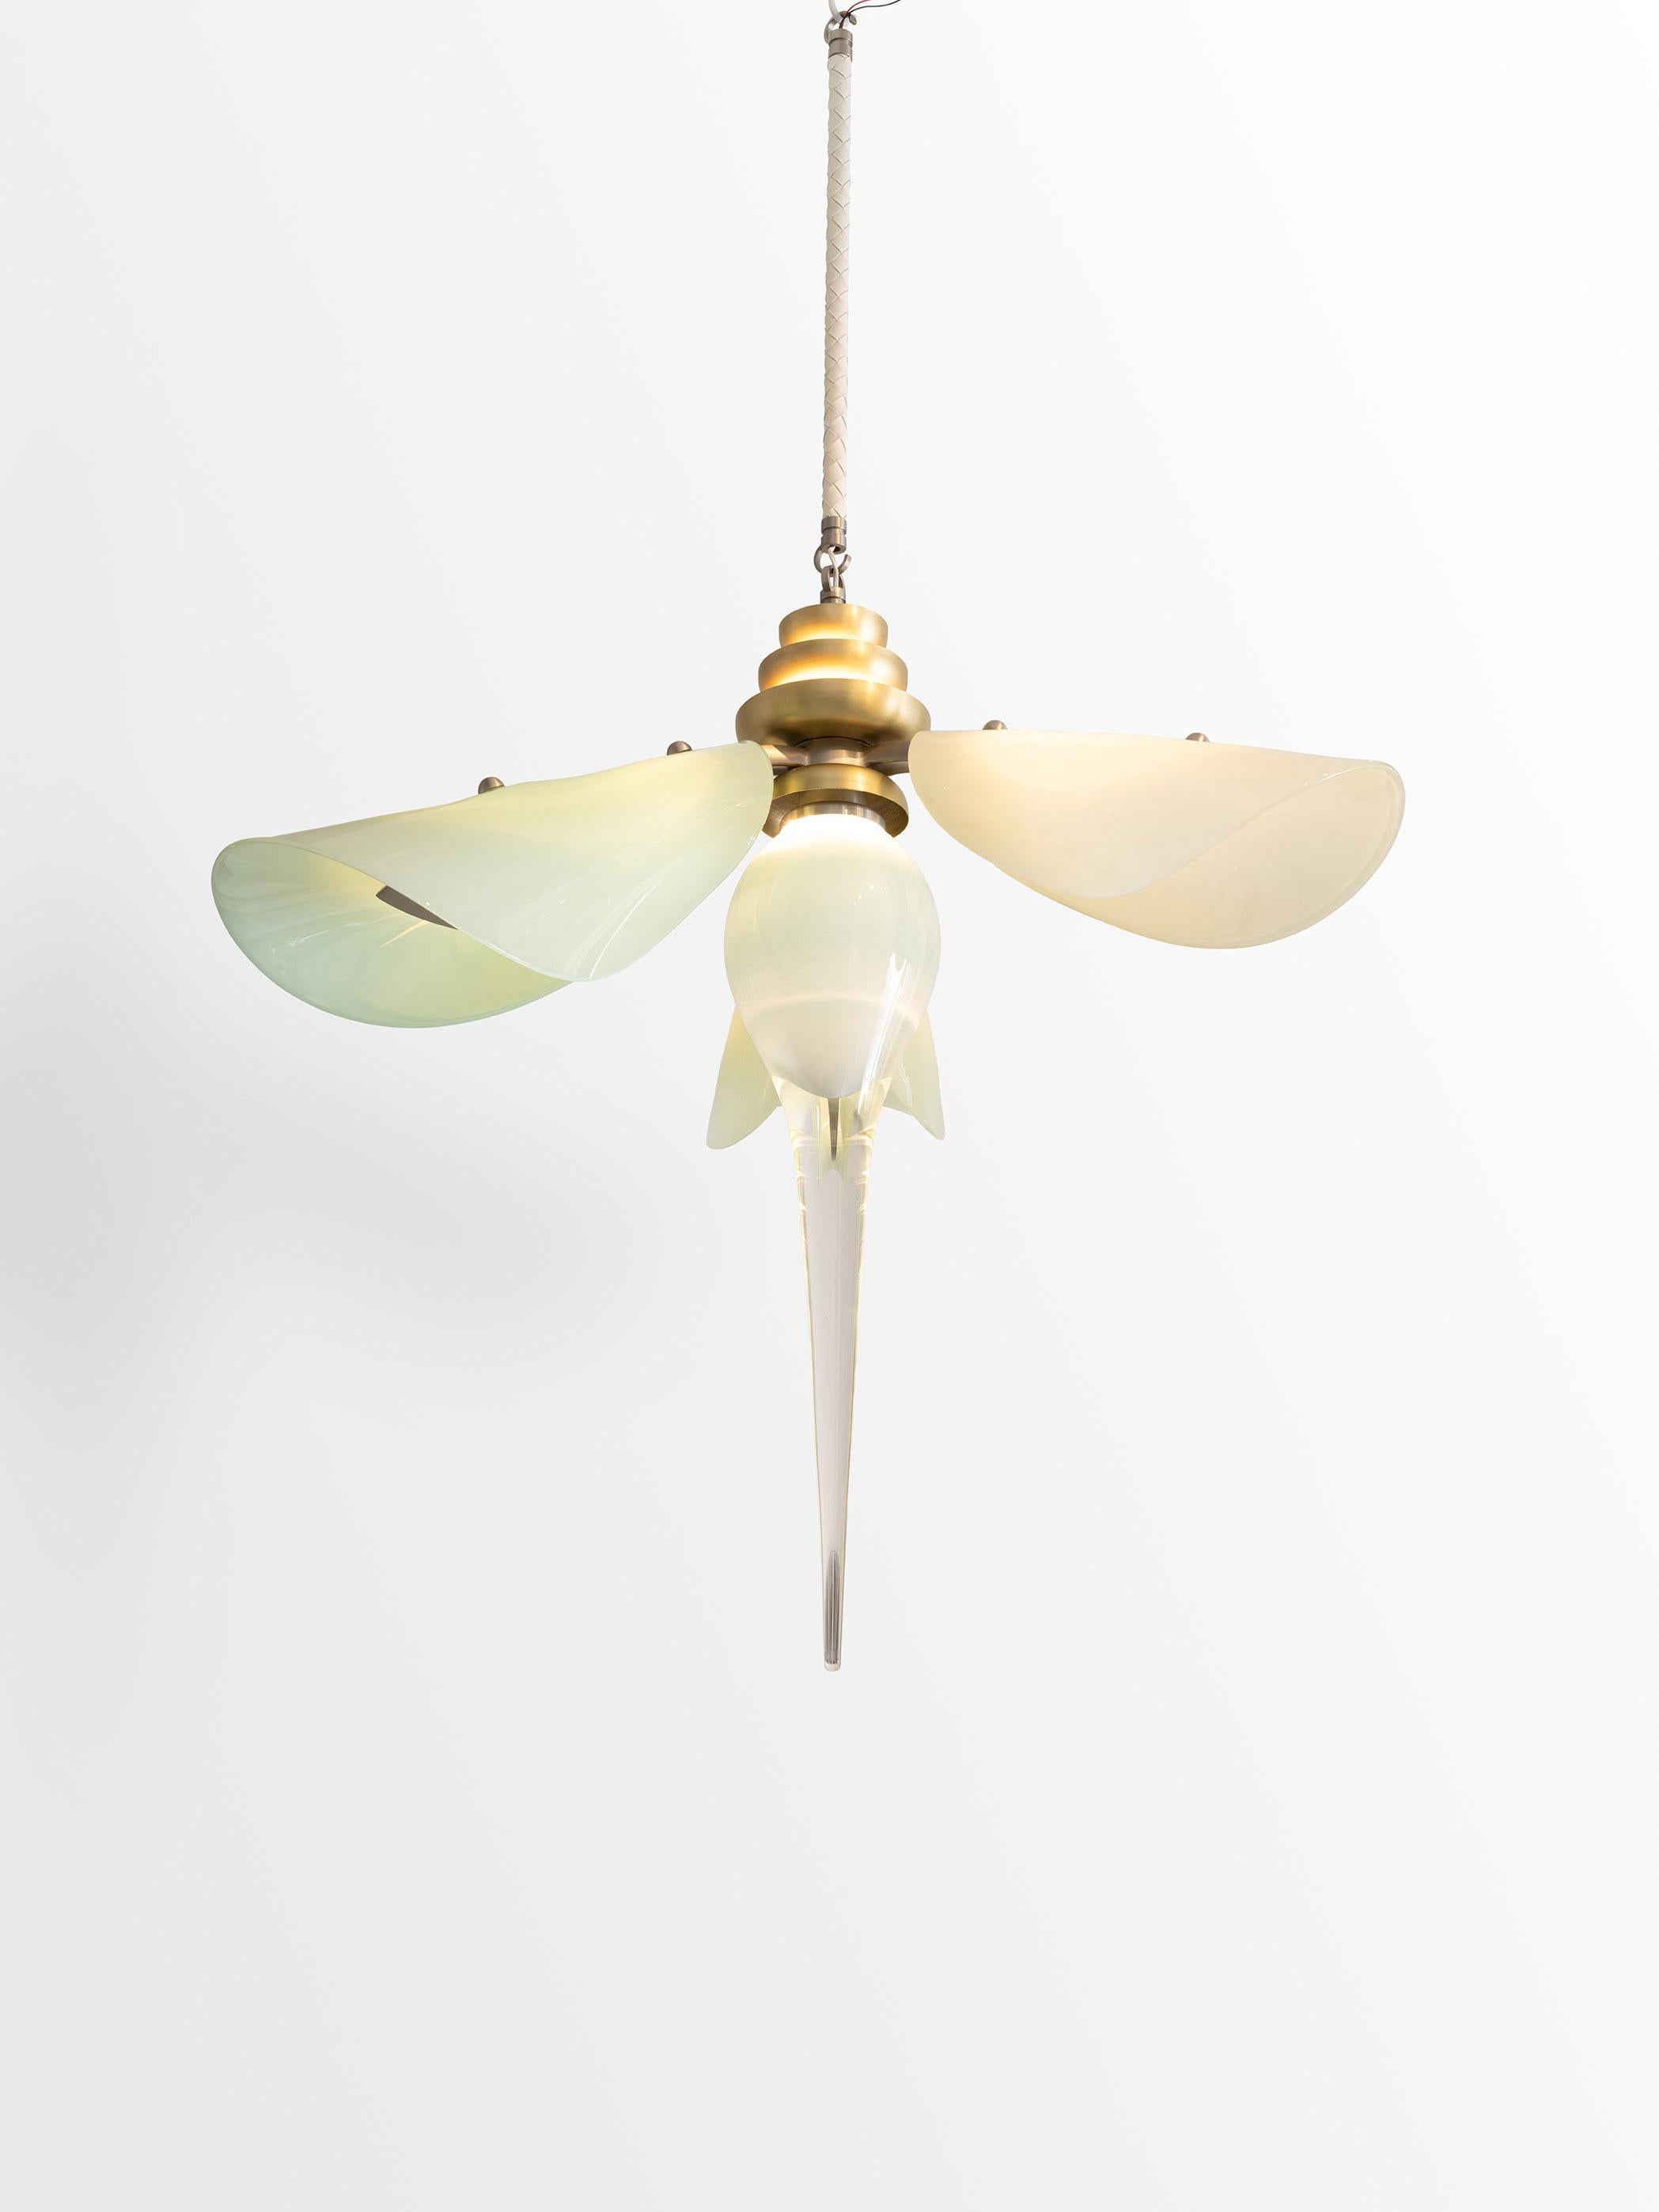 Andreea Avram Rusu
Botanica Chandelier, 2022
Glass, brass, steel, leather, LED
50 x 30 x 30 in 
Glass blossom 32 in; Stem 18 in

About Botanica:
What transpires when Nature is left to its own devices? It is free to express itself—sensual,